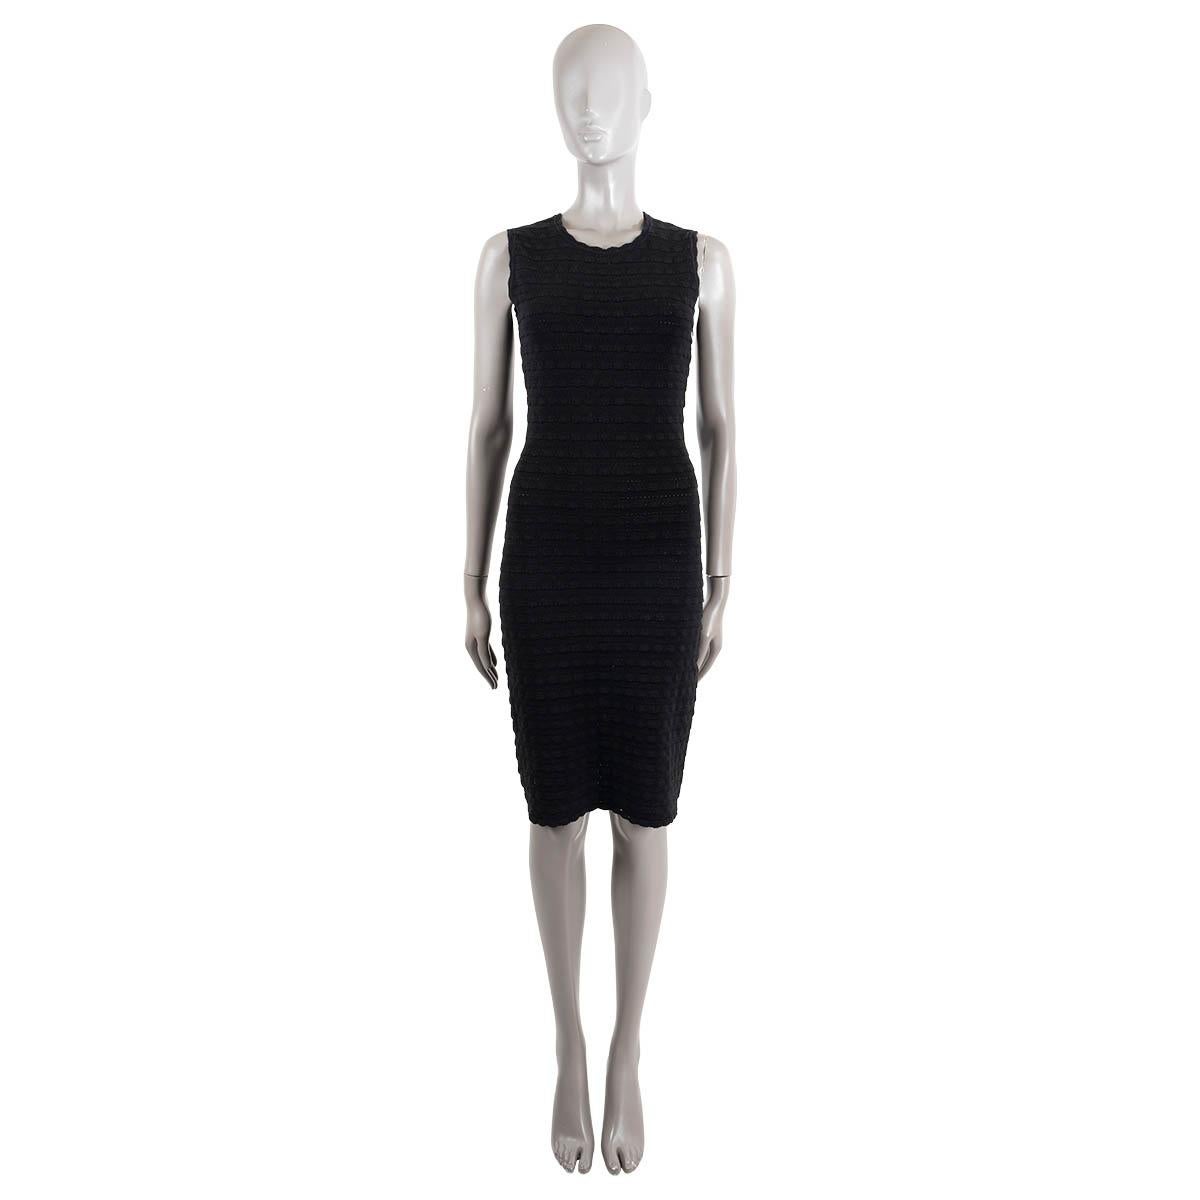 100% authentic Alaïa scalloped jacquard bodycon dress in black cotton (80%), polyamide (15%) and polyester (5%). Opens with a concealed zipper on the side. Unlined.Has been worn and is in excellent condition

Measurements
Tag